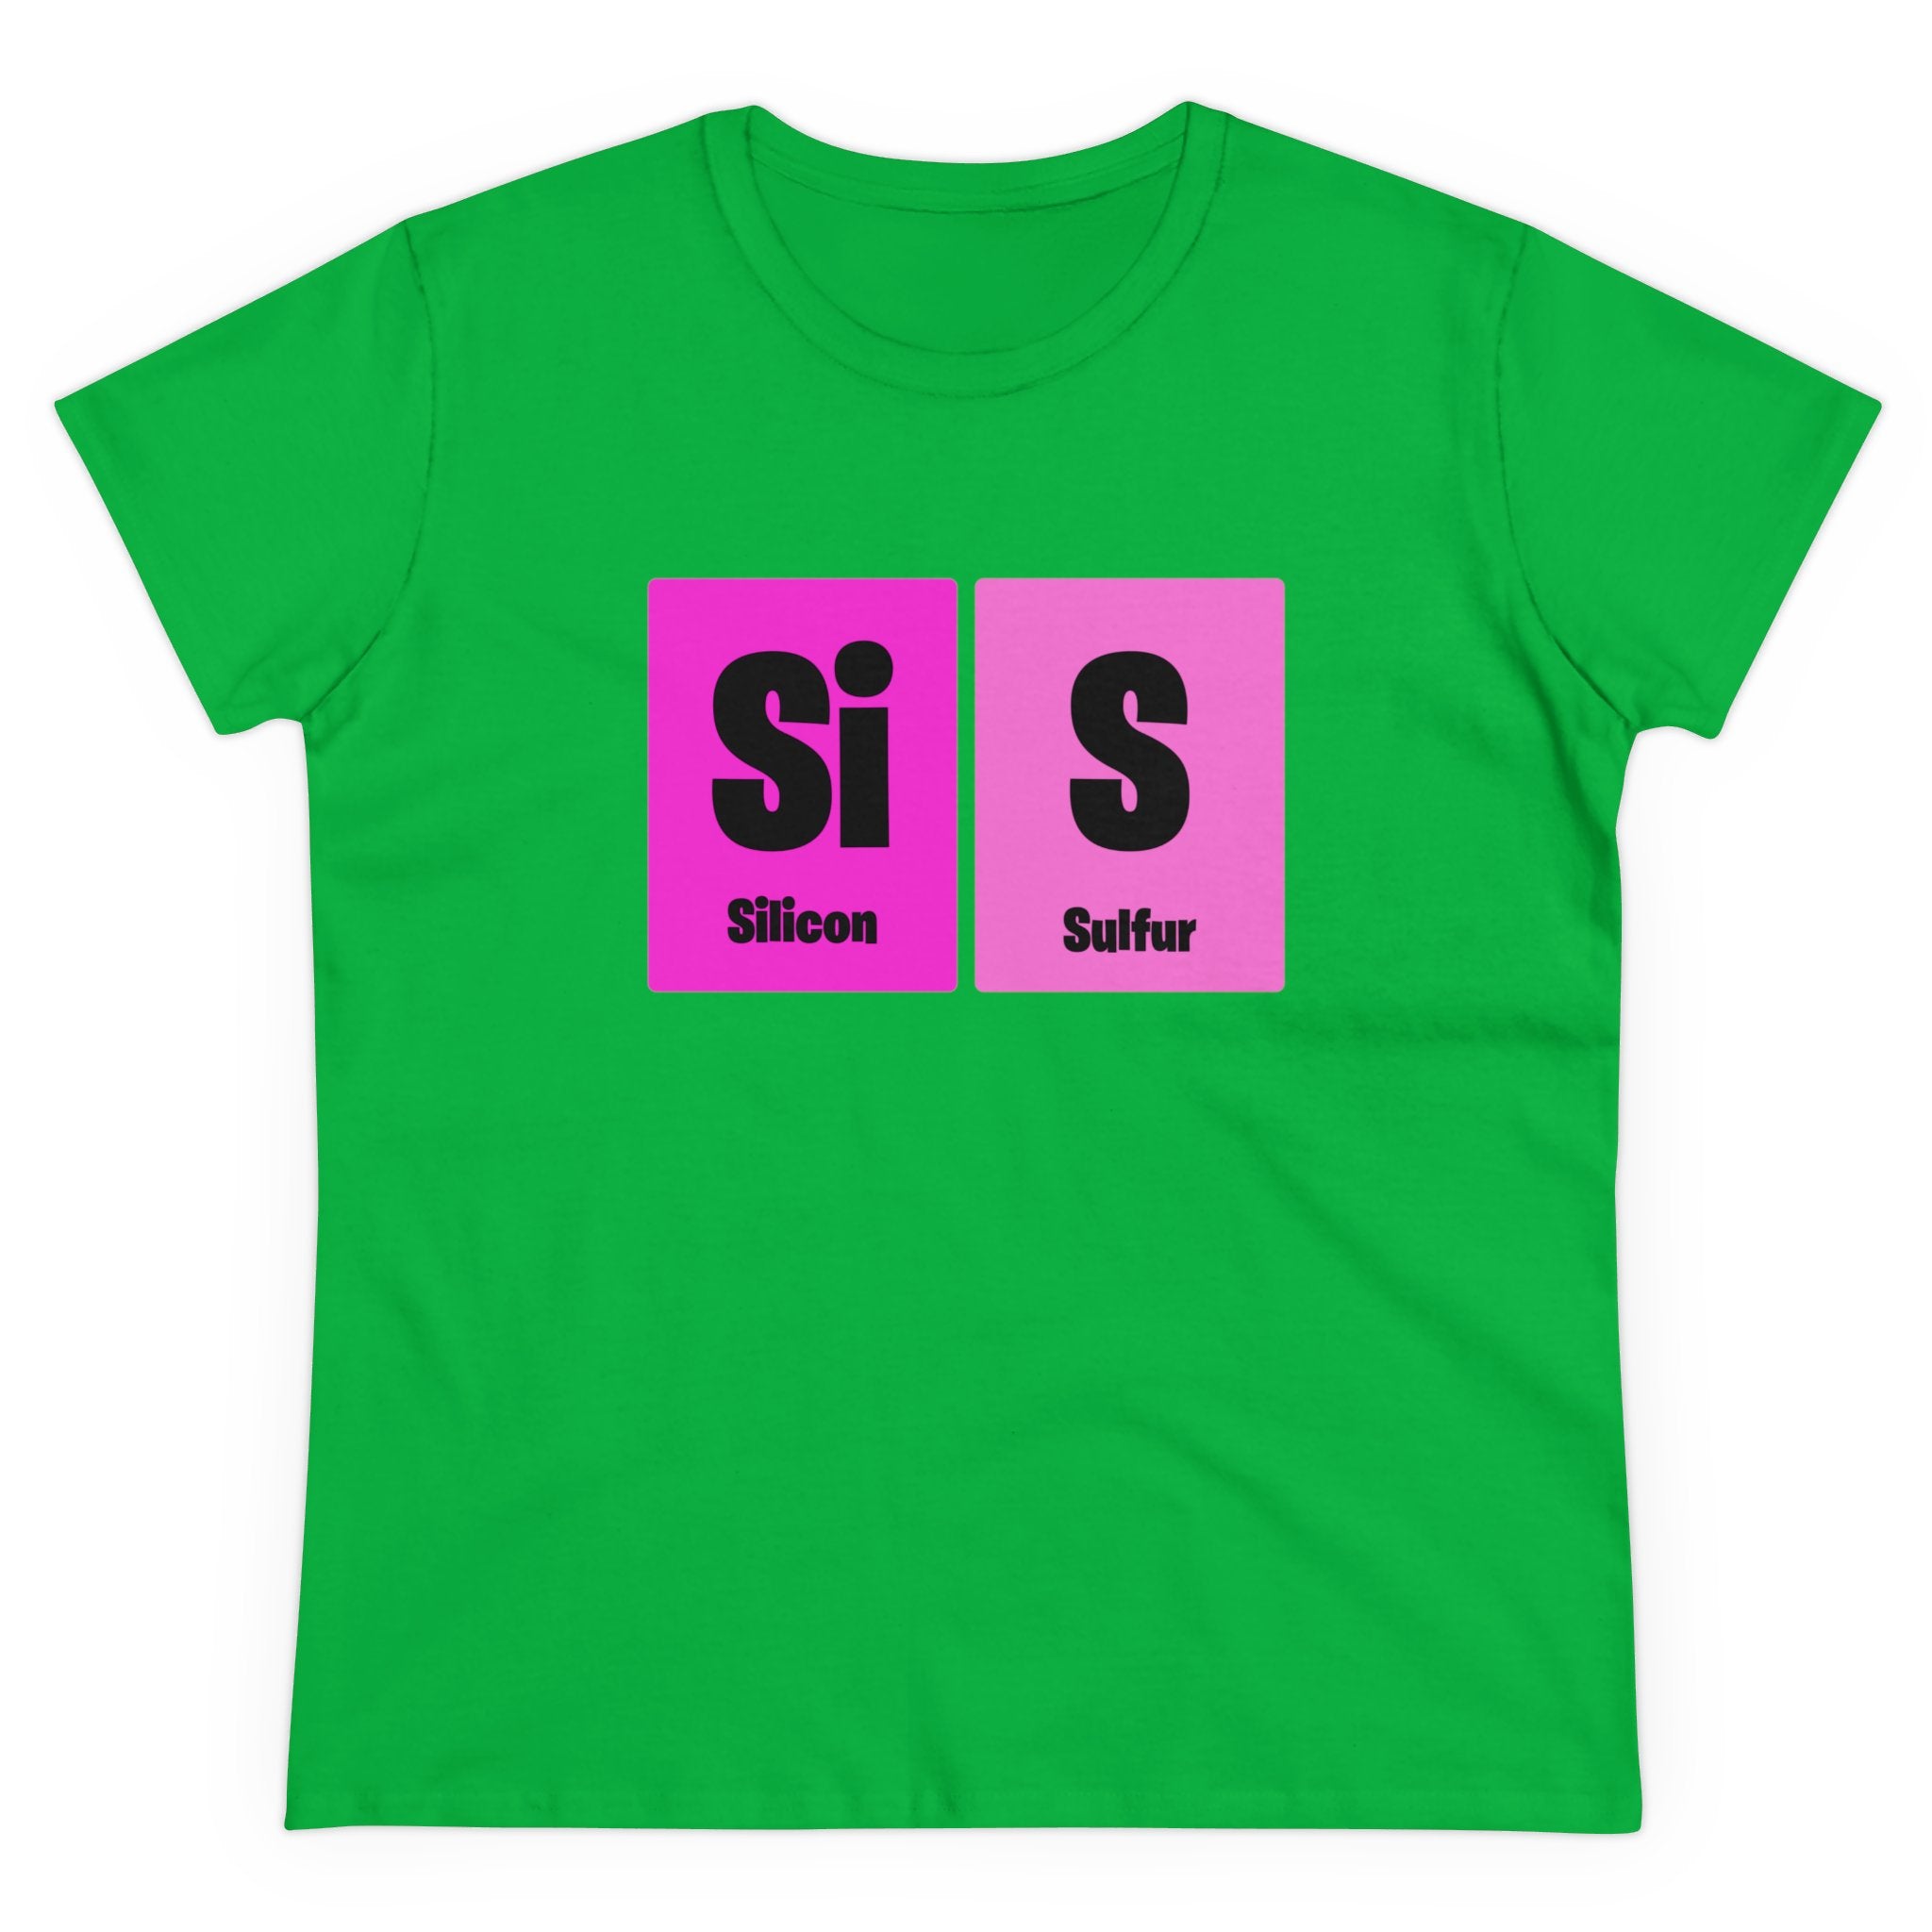 A green Si-S Light Pendant - Women's Tee displaying elements Silicon (Si) and Sulfur (S) from the periodic table, printed as pink blocks with black letters, perfect for adding a touch of cozy fashion to your wardrobe.